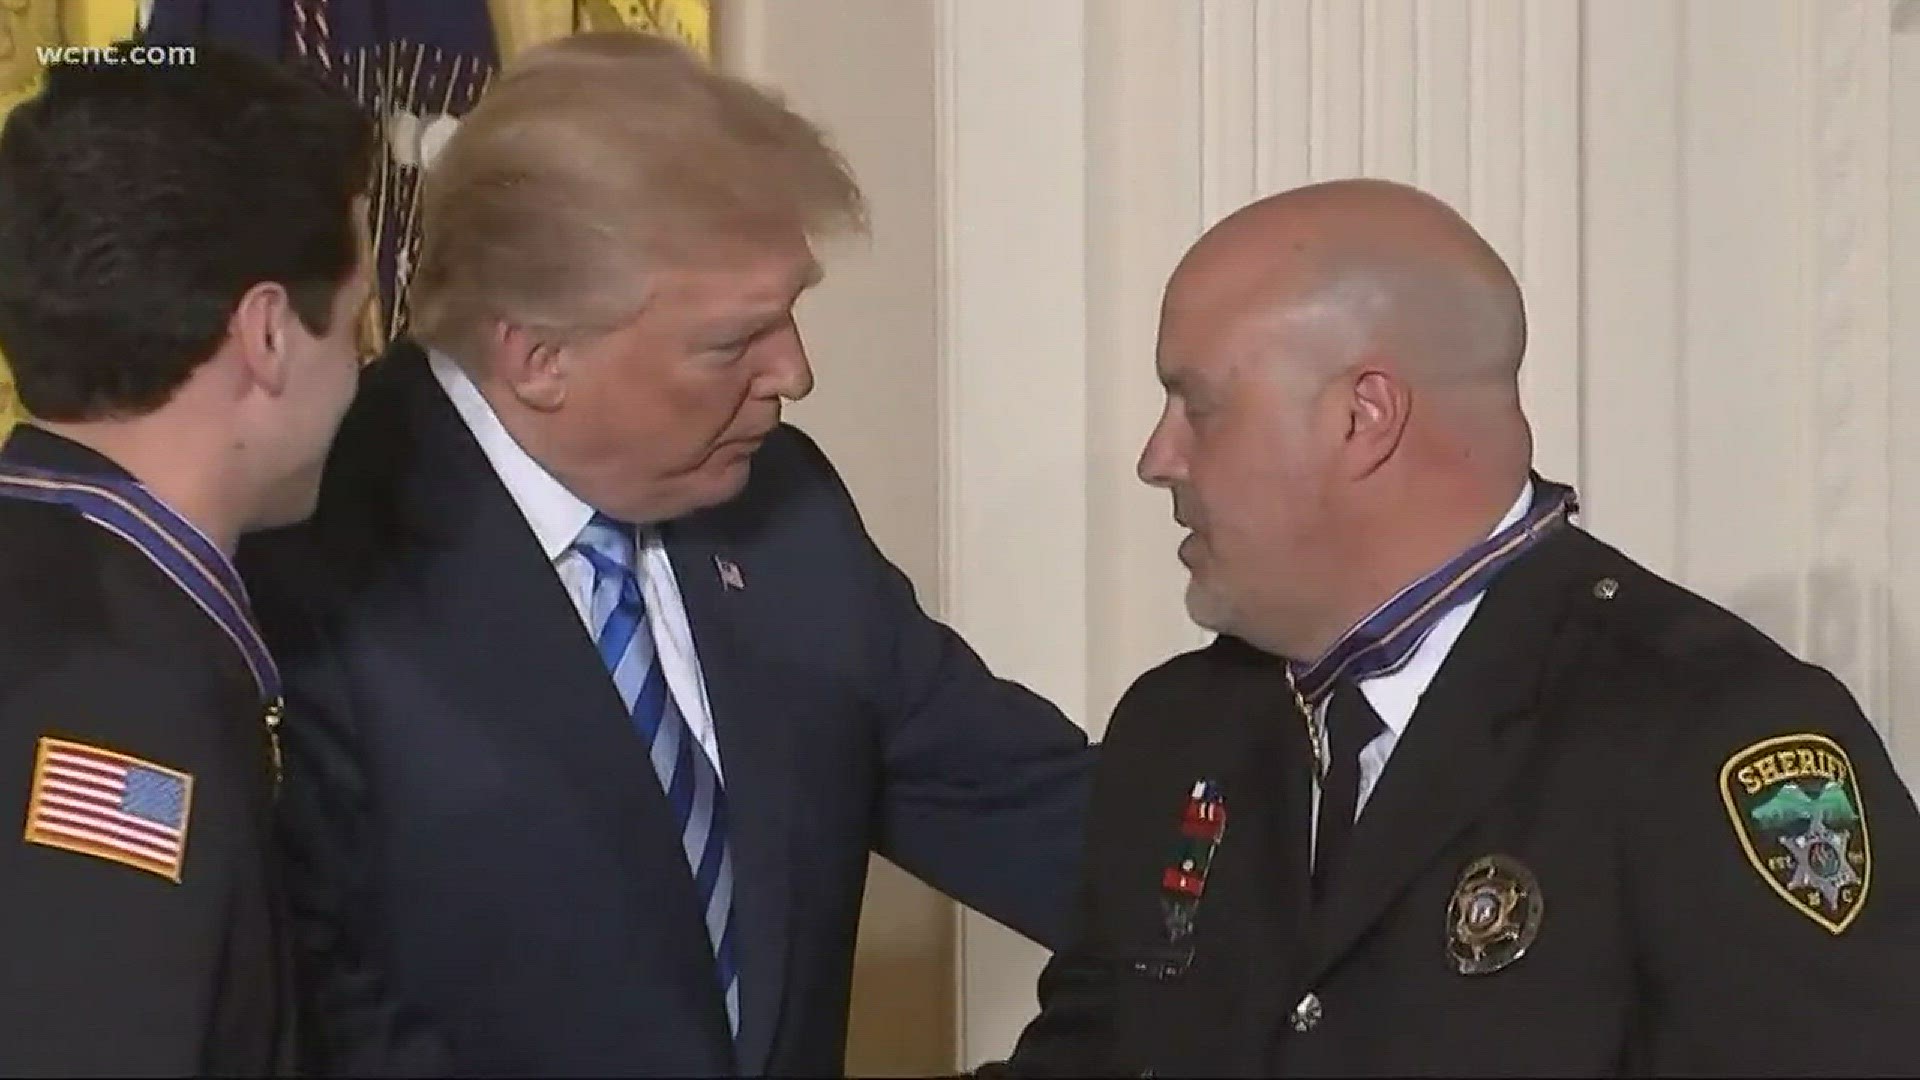 Avery County Sheriff's Deputy Lieutenant William Buchanan was honored by President Donald Trump inside the East Room of the White House Tuesday.